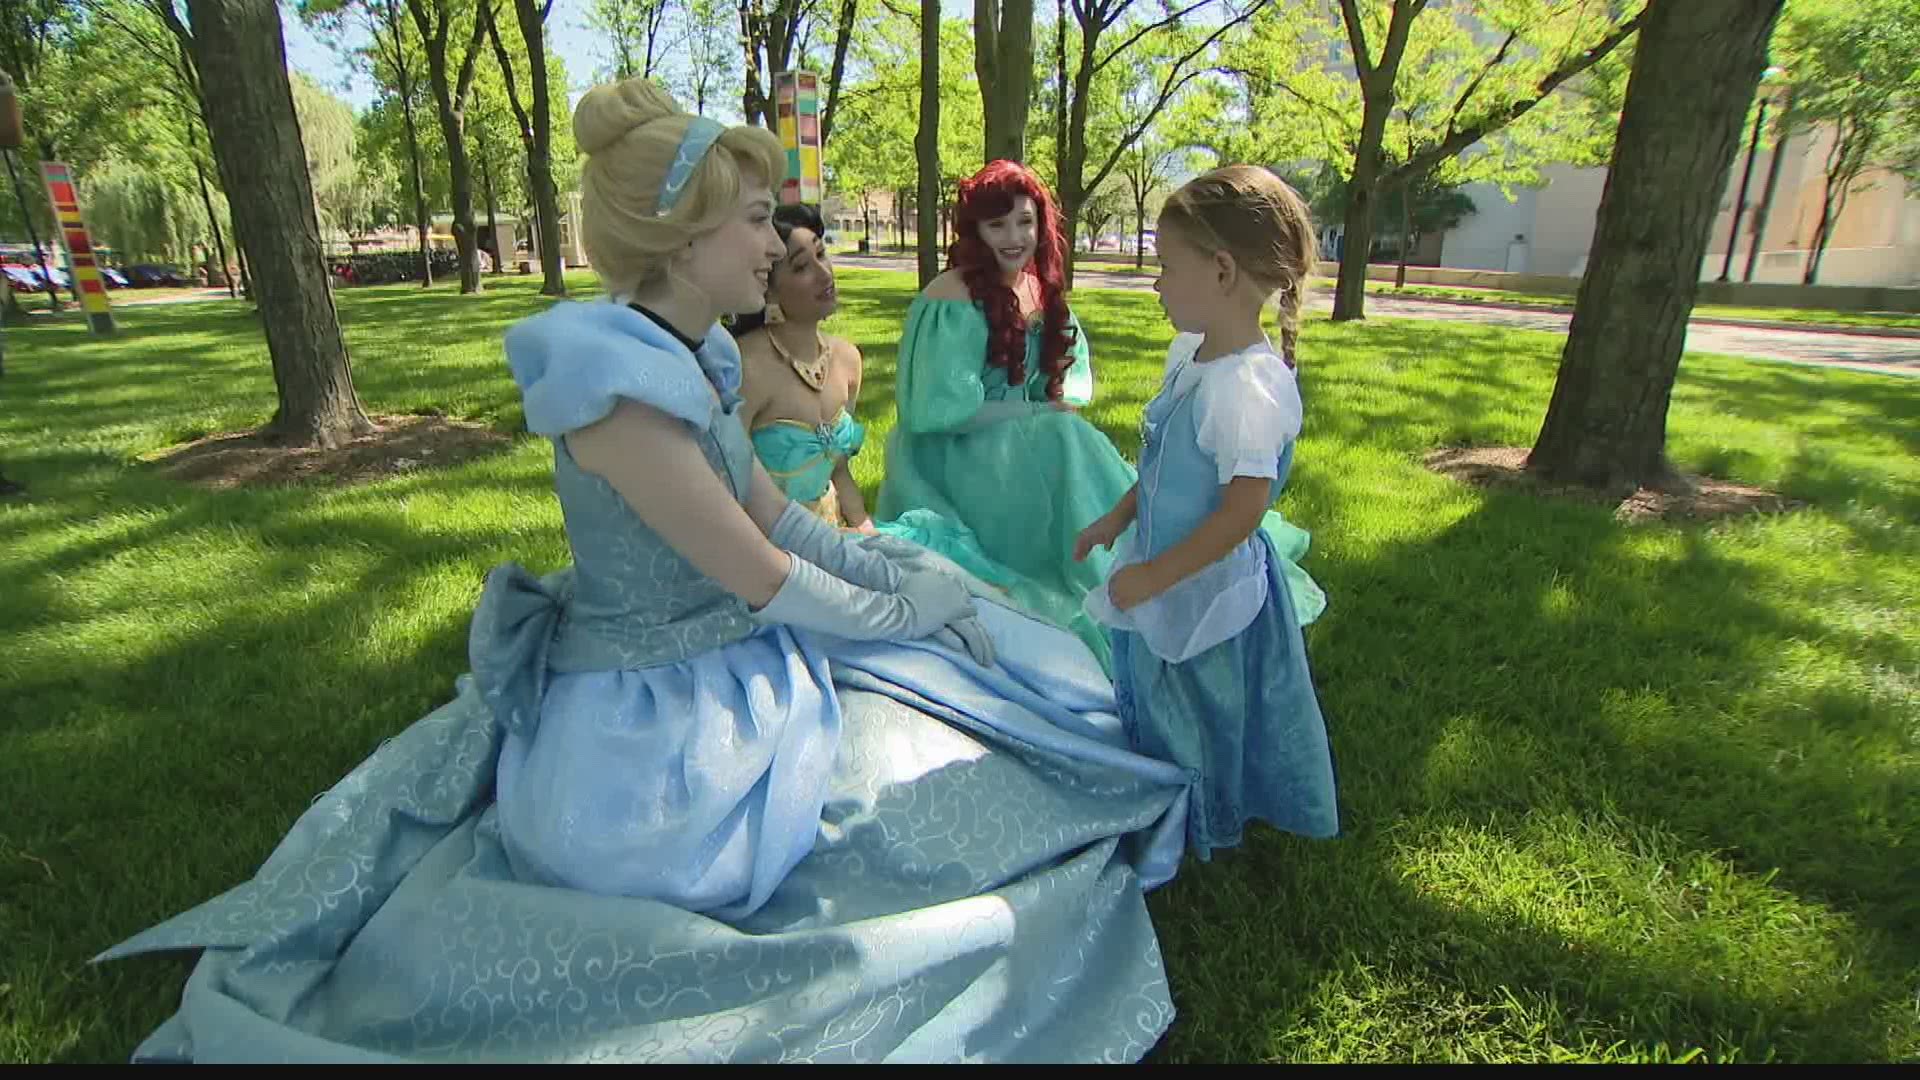 One local company which provides Fairytale Princesses for parties has seen a 600 percent jump in business in the past few months.